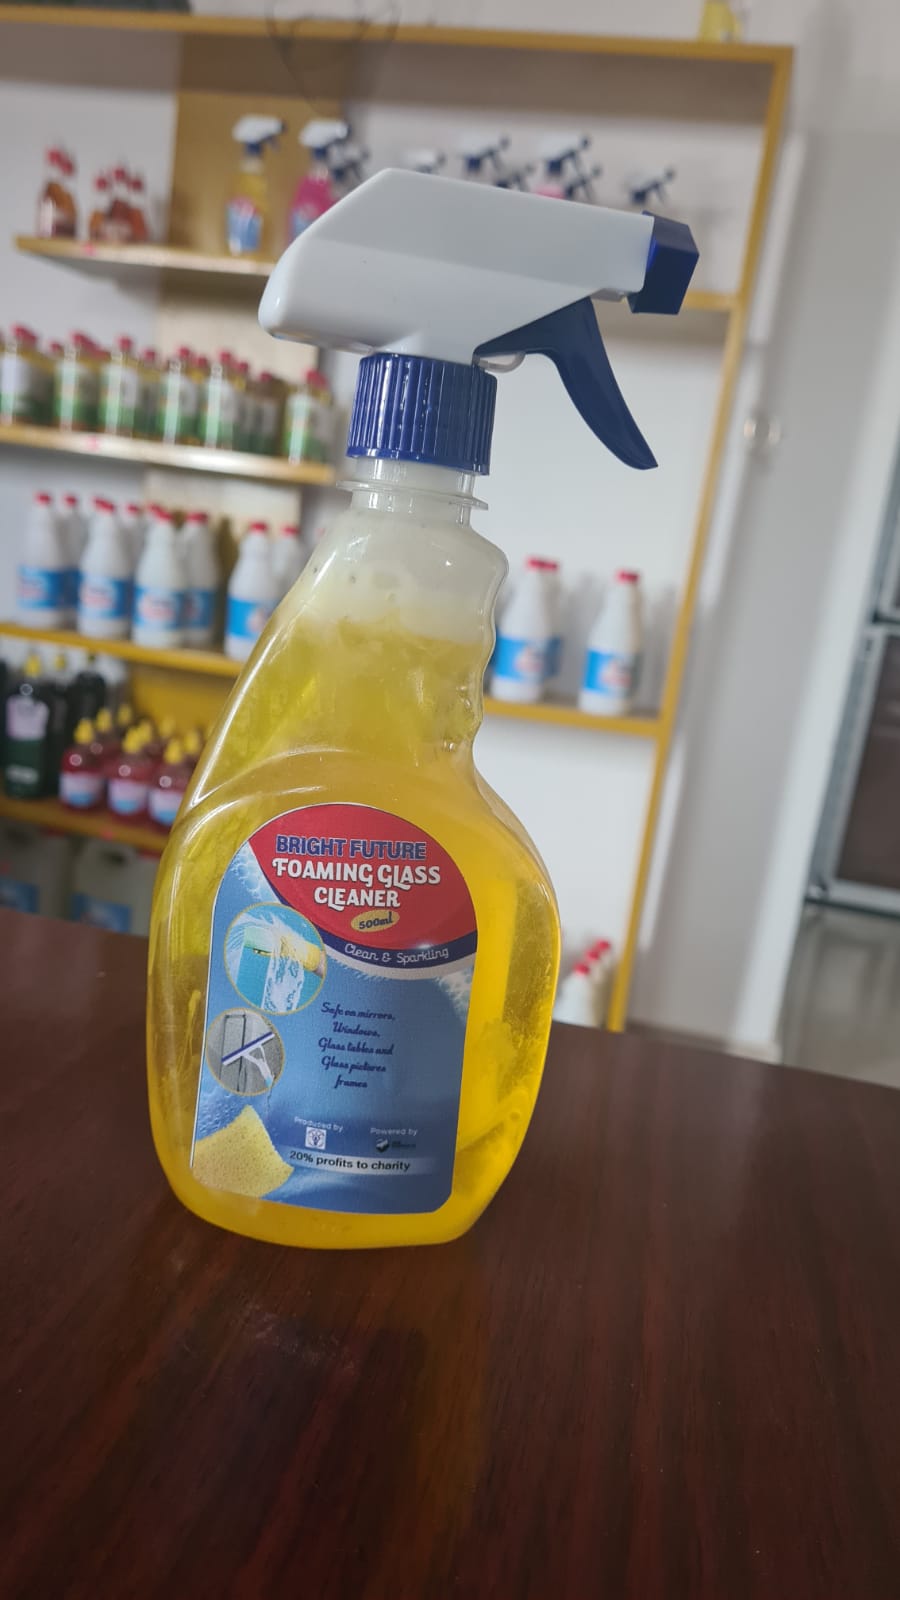 Foaming Glass cleaner 1,500frs